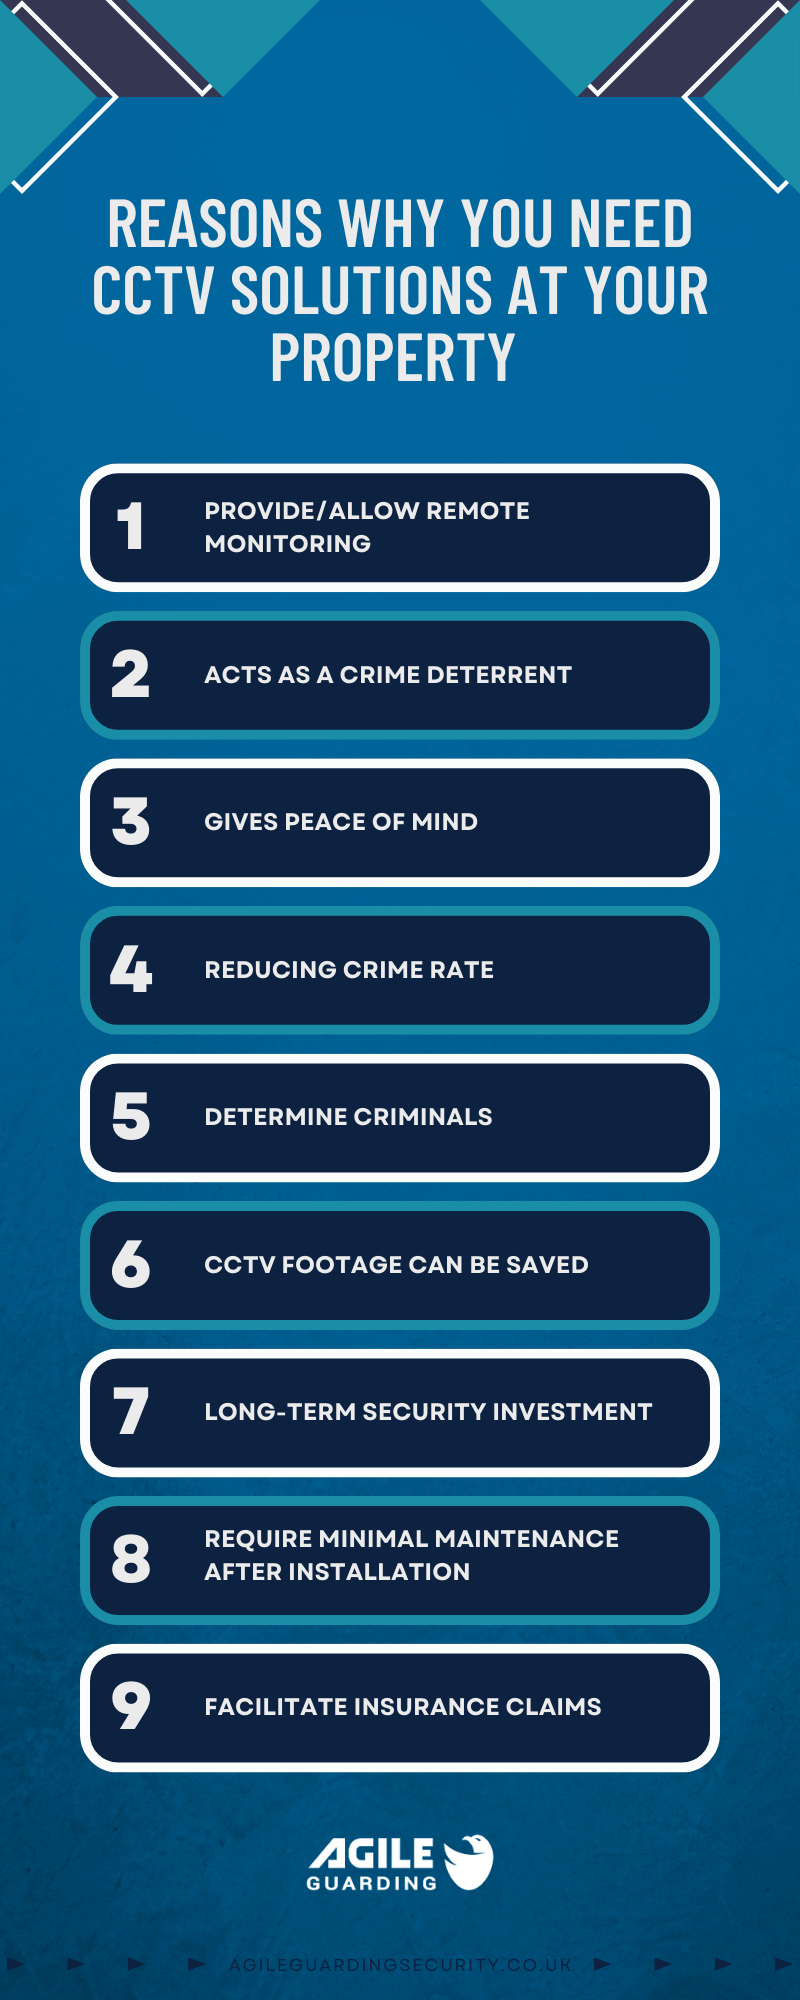 9 Reasons You Need CCTV Solutions at Your Property - Infographic